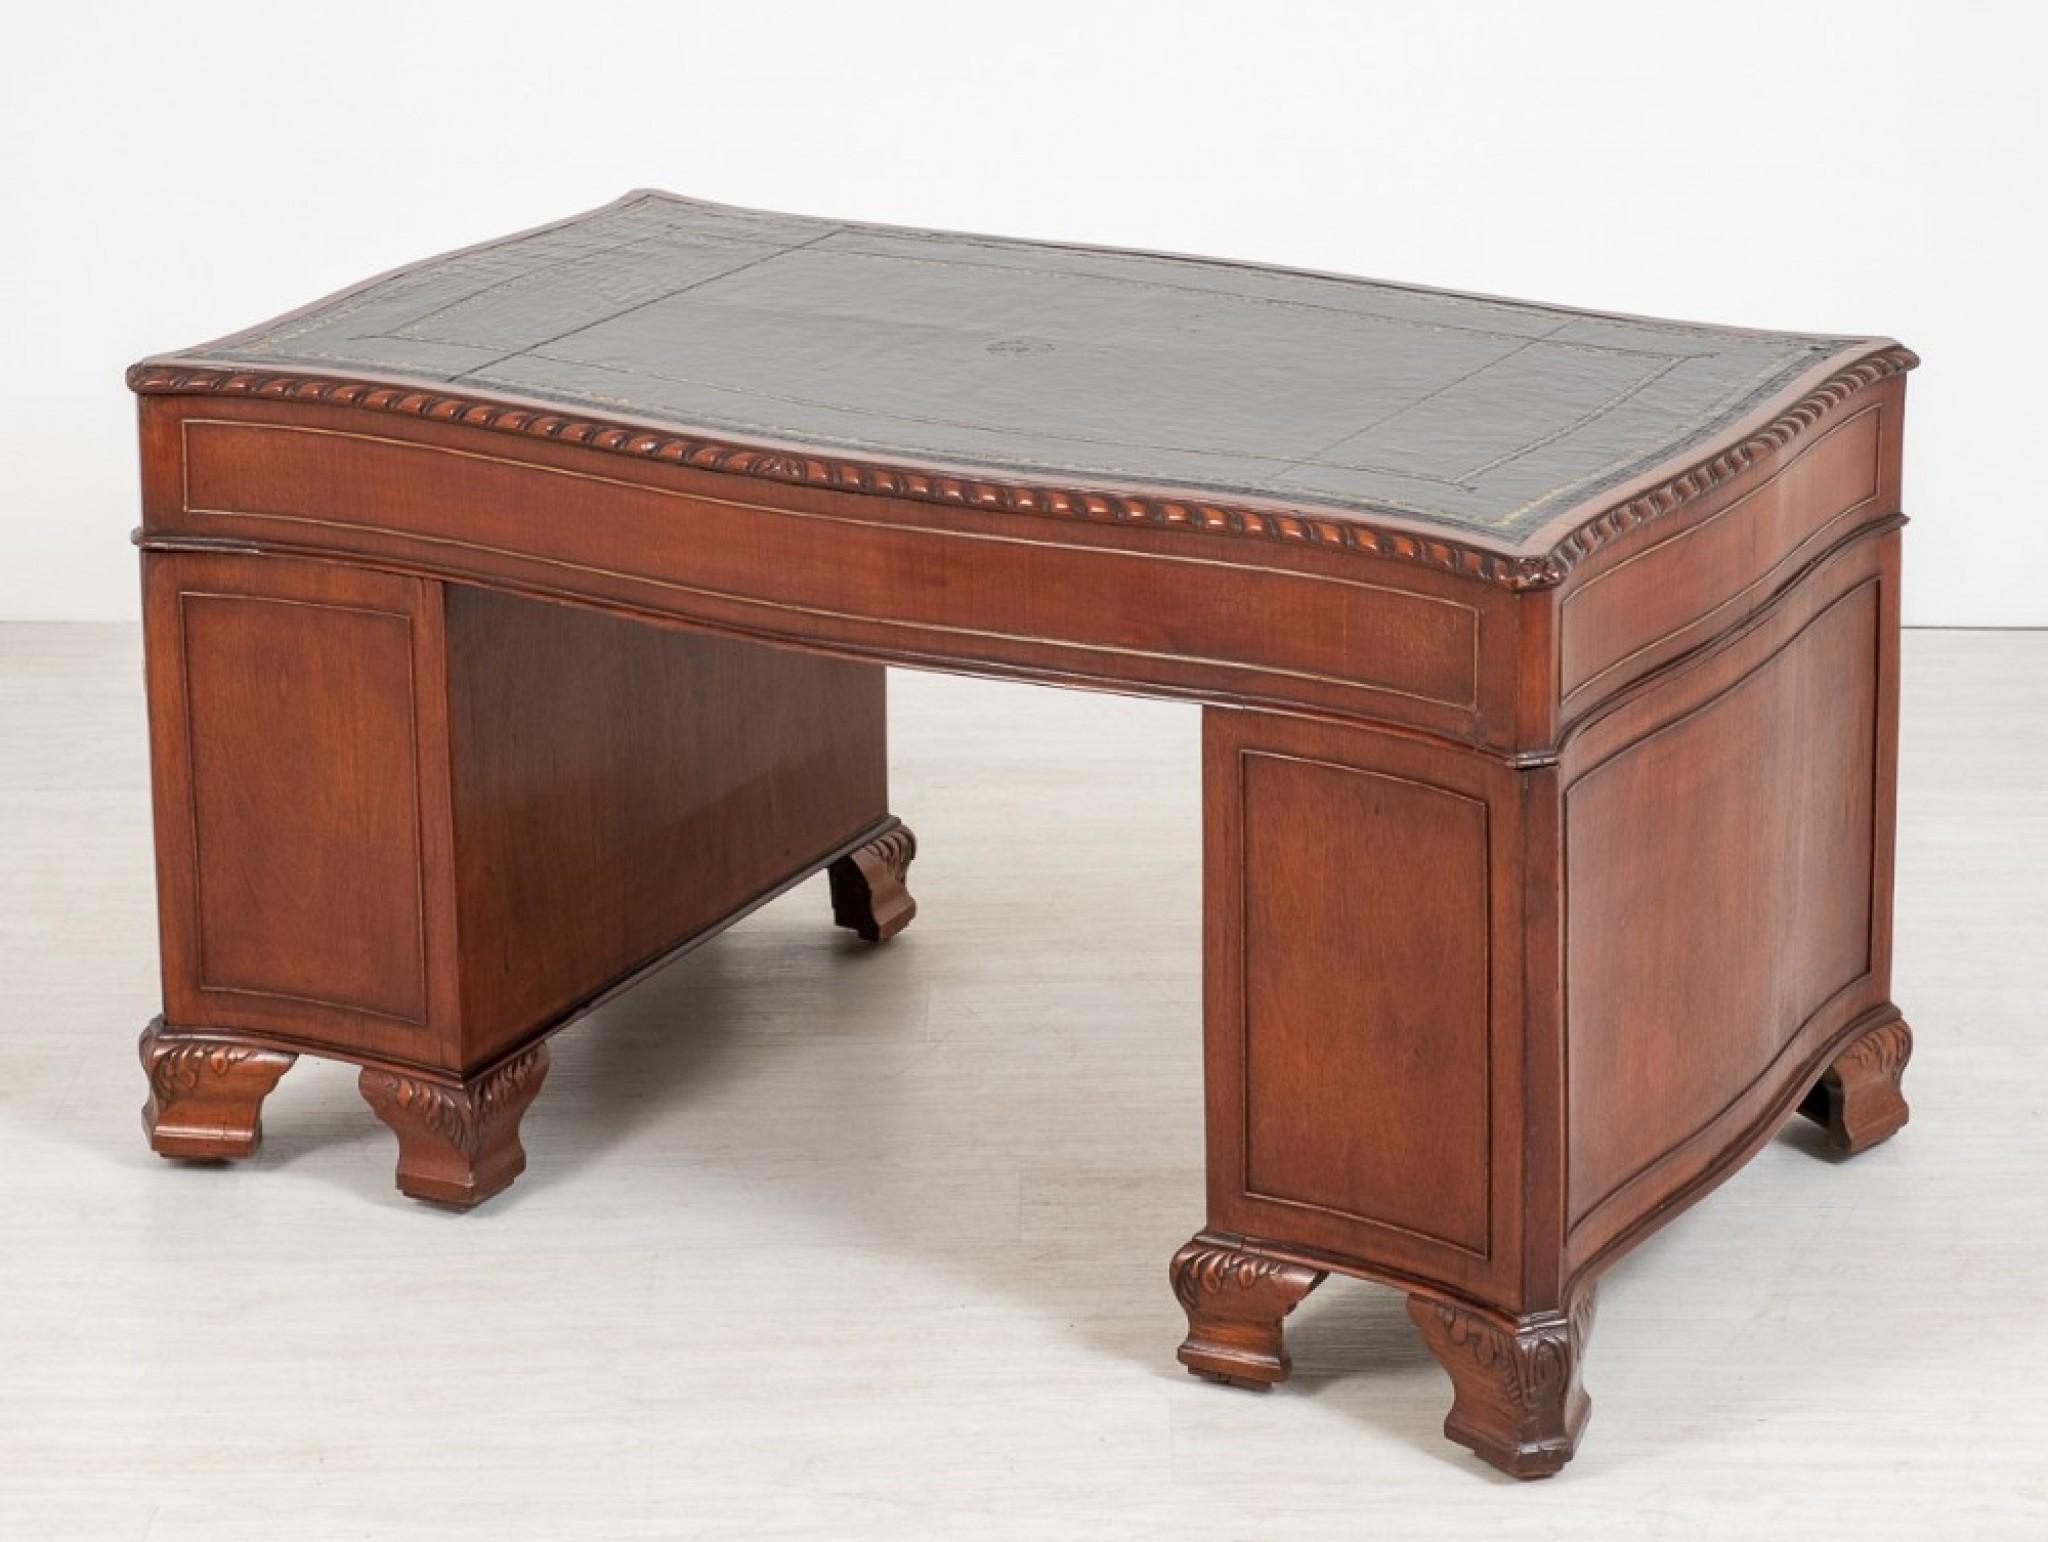 Mahogany chippendale style desk of serpentine form.
circa 1880
The desk stands upon typical Chippendale style carved ogee feet.
The desk has an arrangement of 9 graduated drawers.
The drawers feature high quality mahogany flame veneers and cast